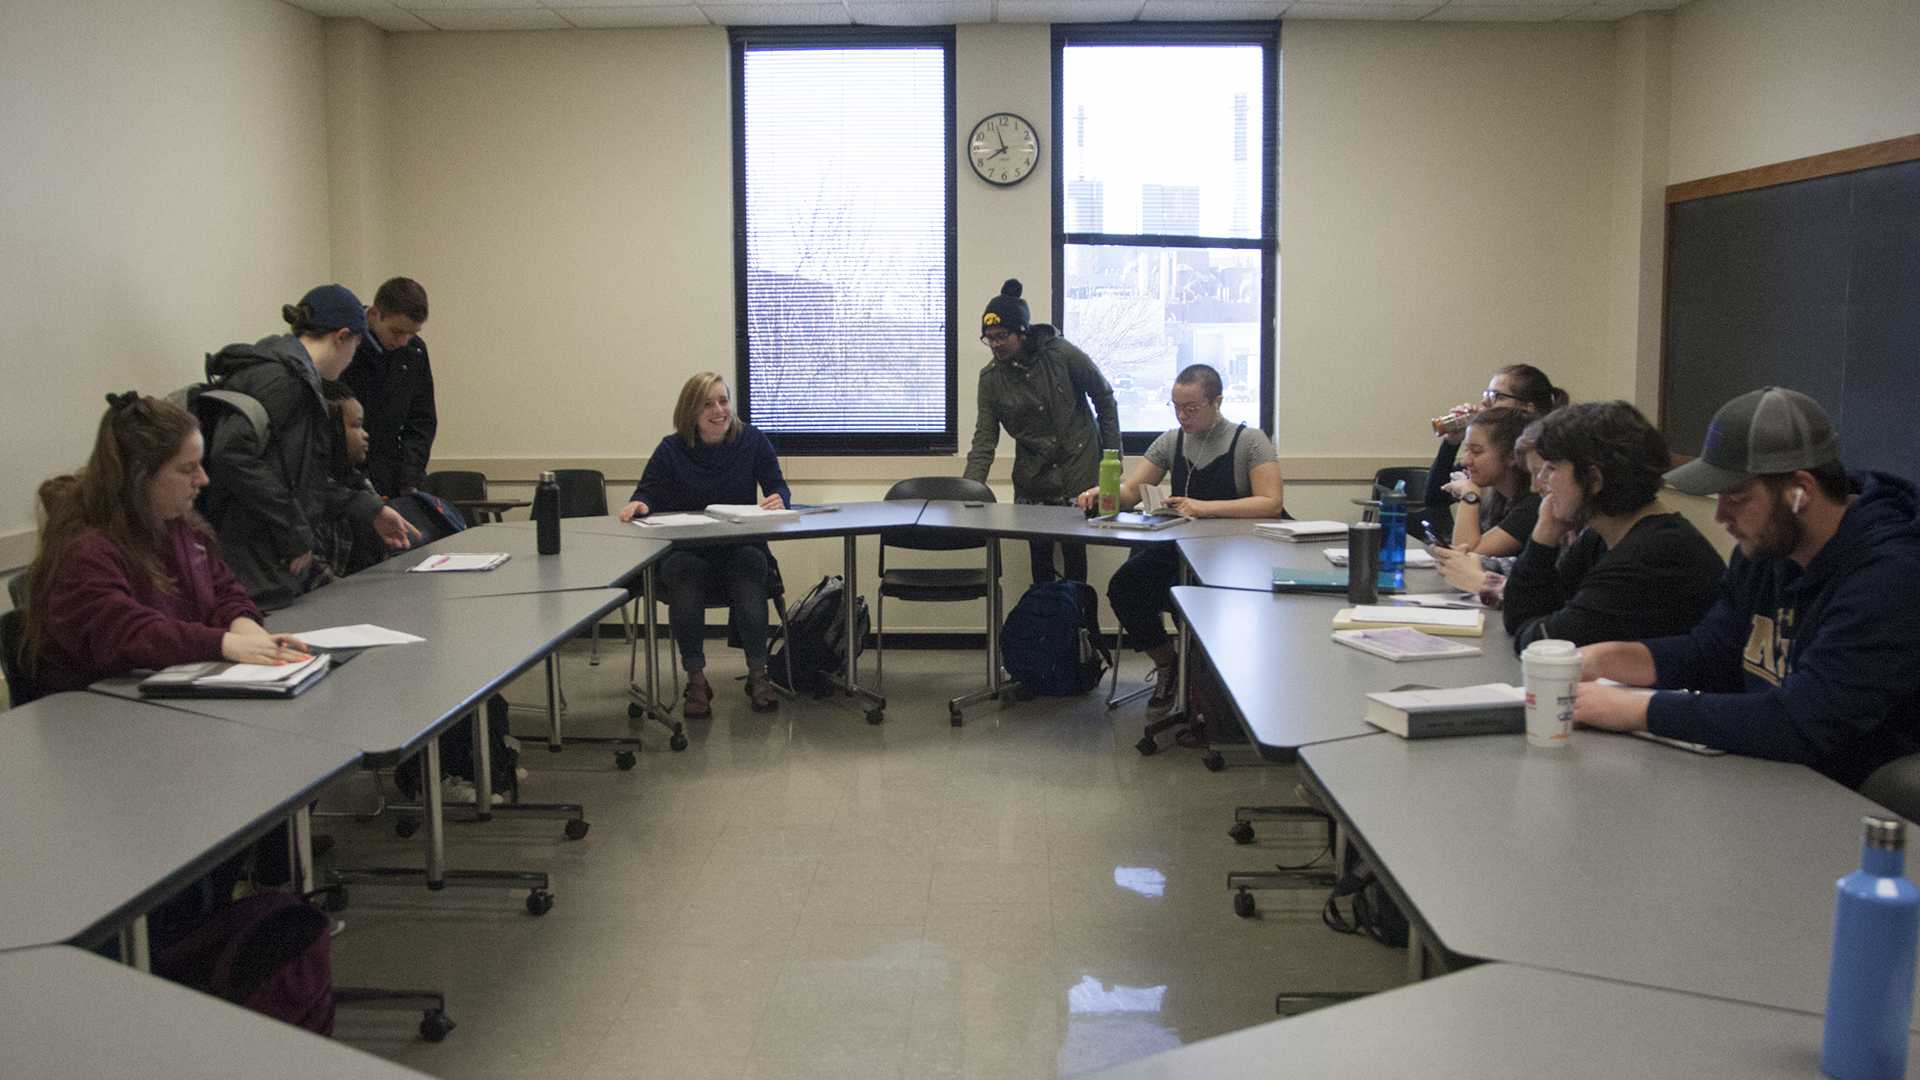 Students prepare before their Foundations of Creative Writing class on Feb. 27, 2018. Foundations of Creative Writing is one of the introductory classes for the growing major that focuses mainly on critical reading and developing core writing skills. (Katie Goodale/The Daily Iowan)